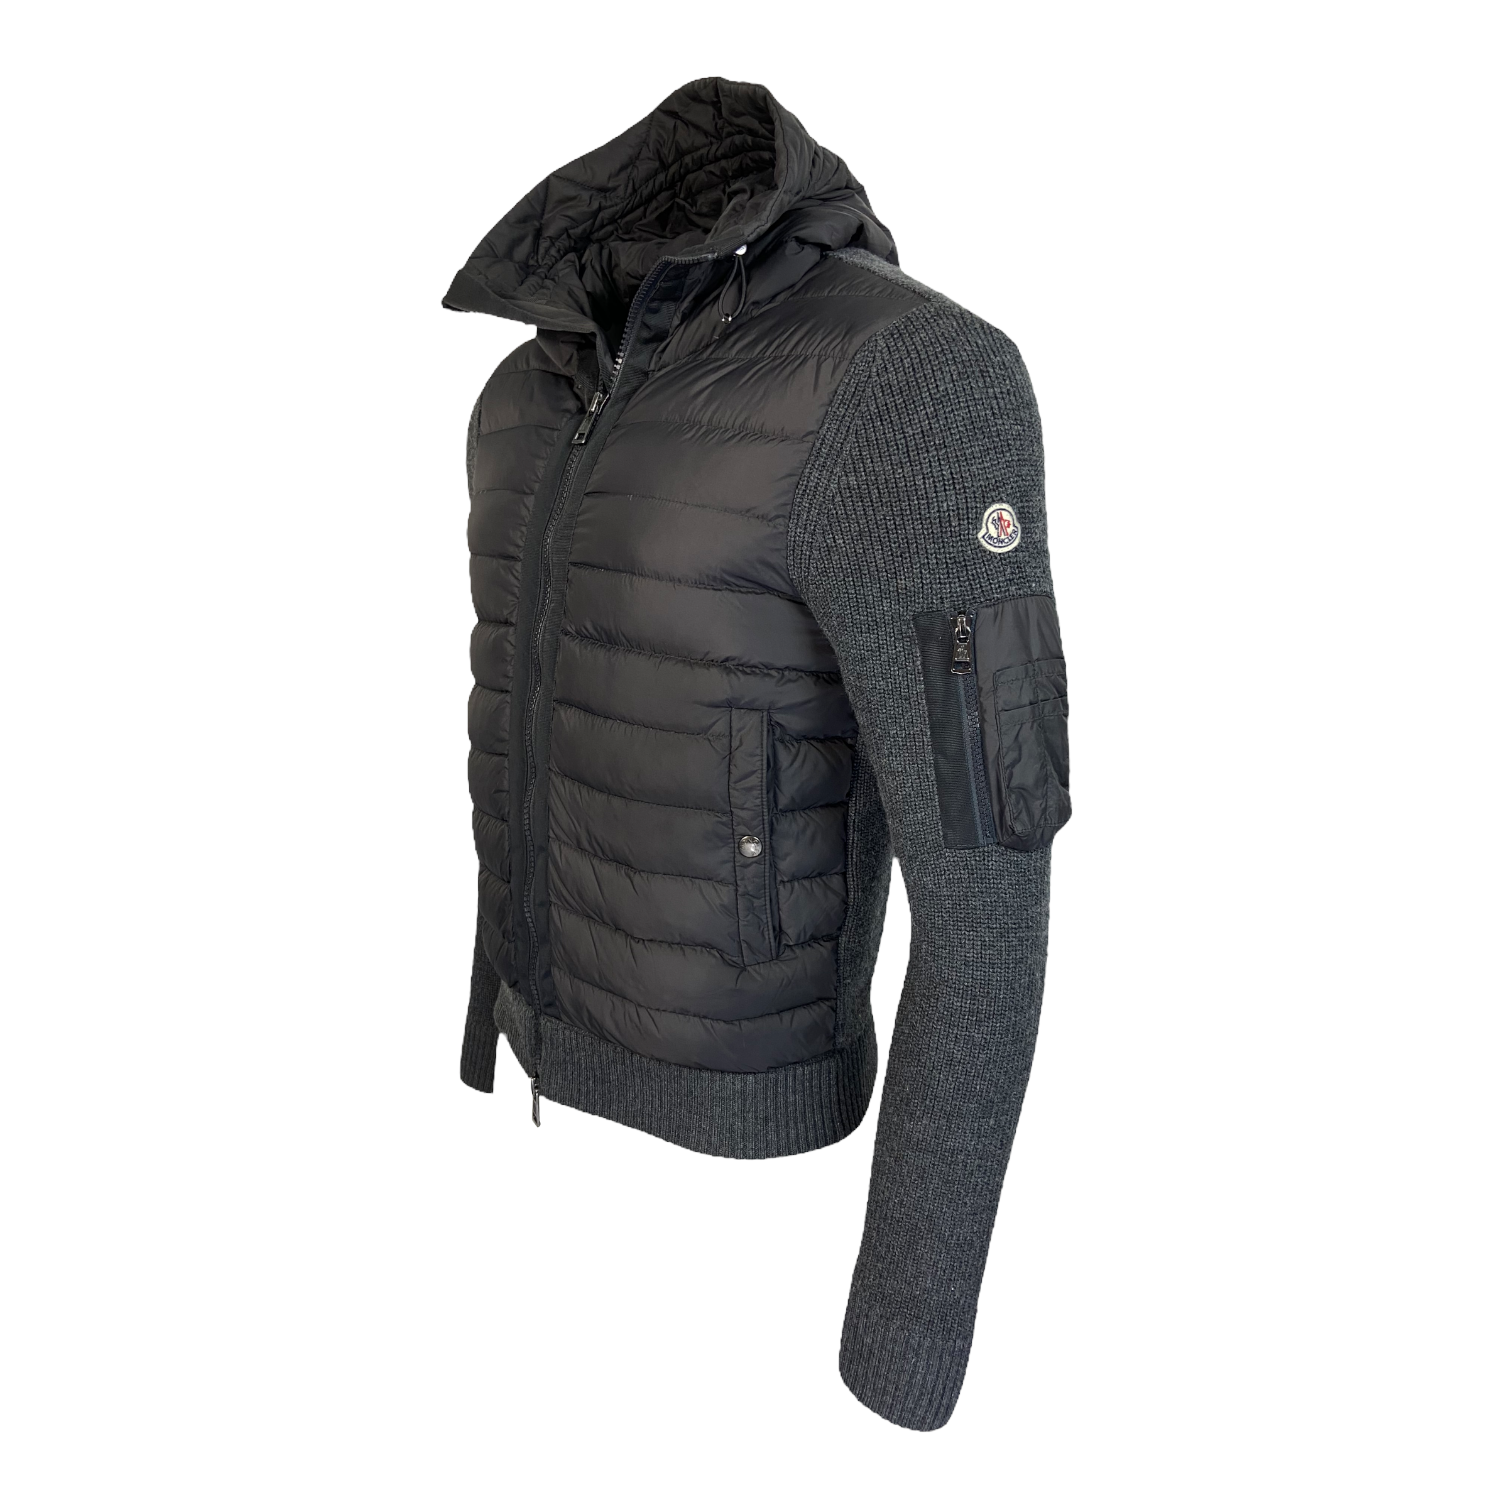 Moncler Hooded Down Cardigan - Size M (Fits S)